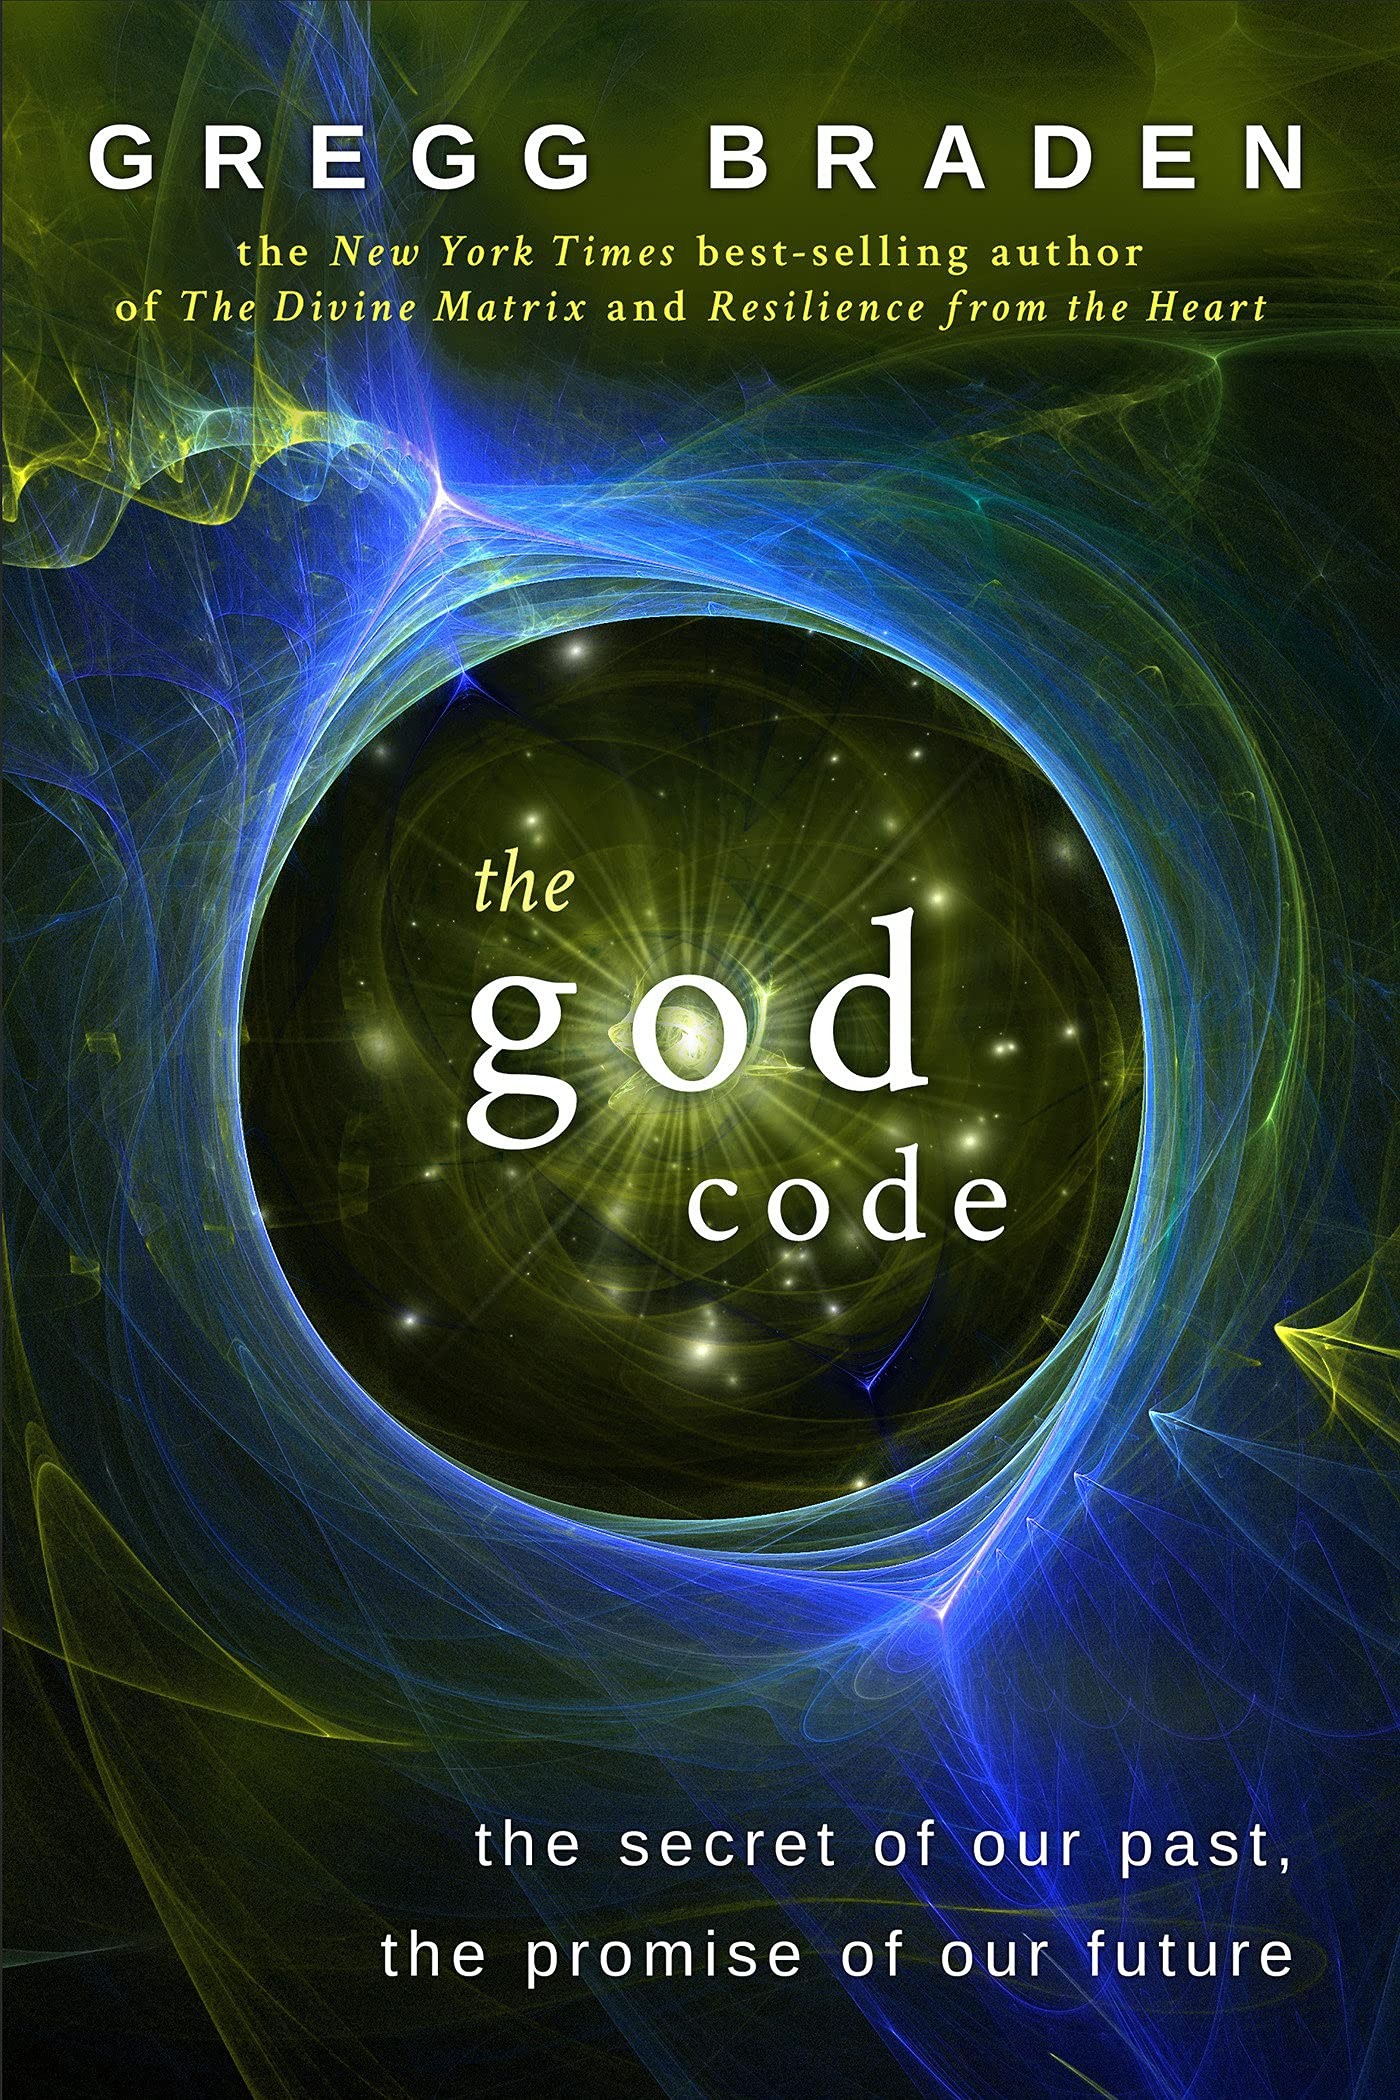 The God Code:The Secret of Our Past, the Promise of Our Future